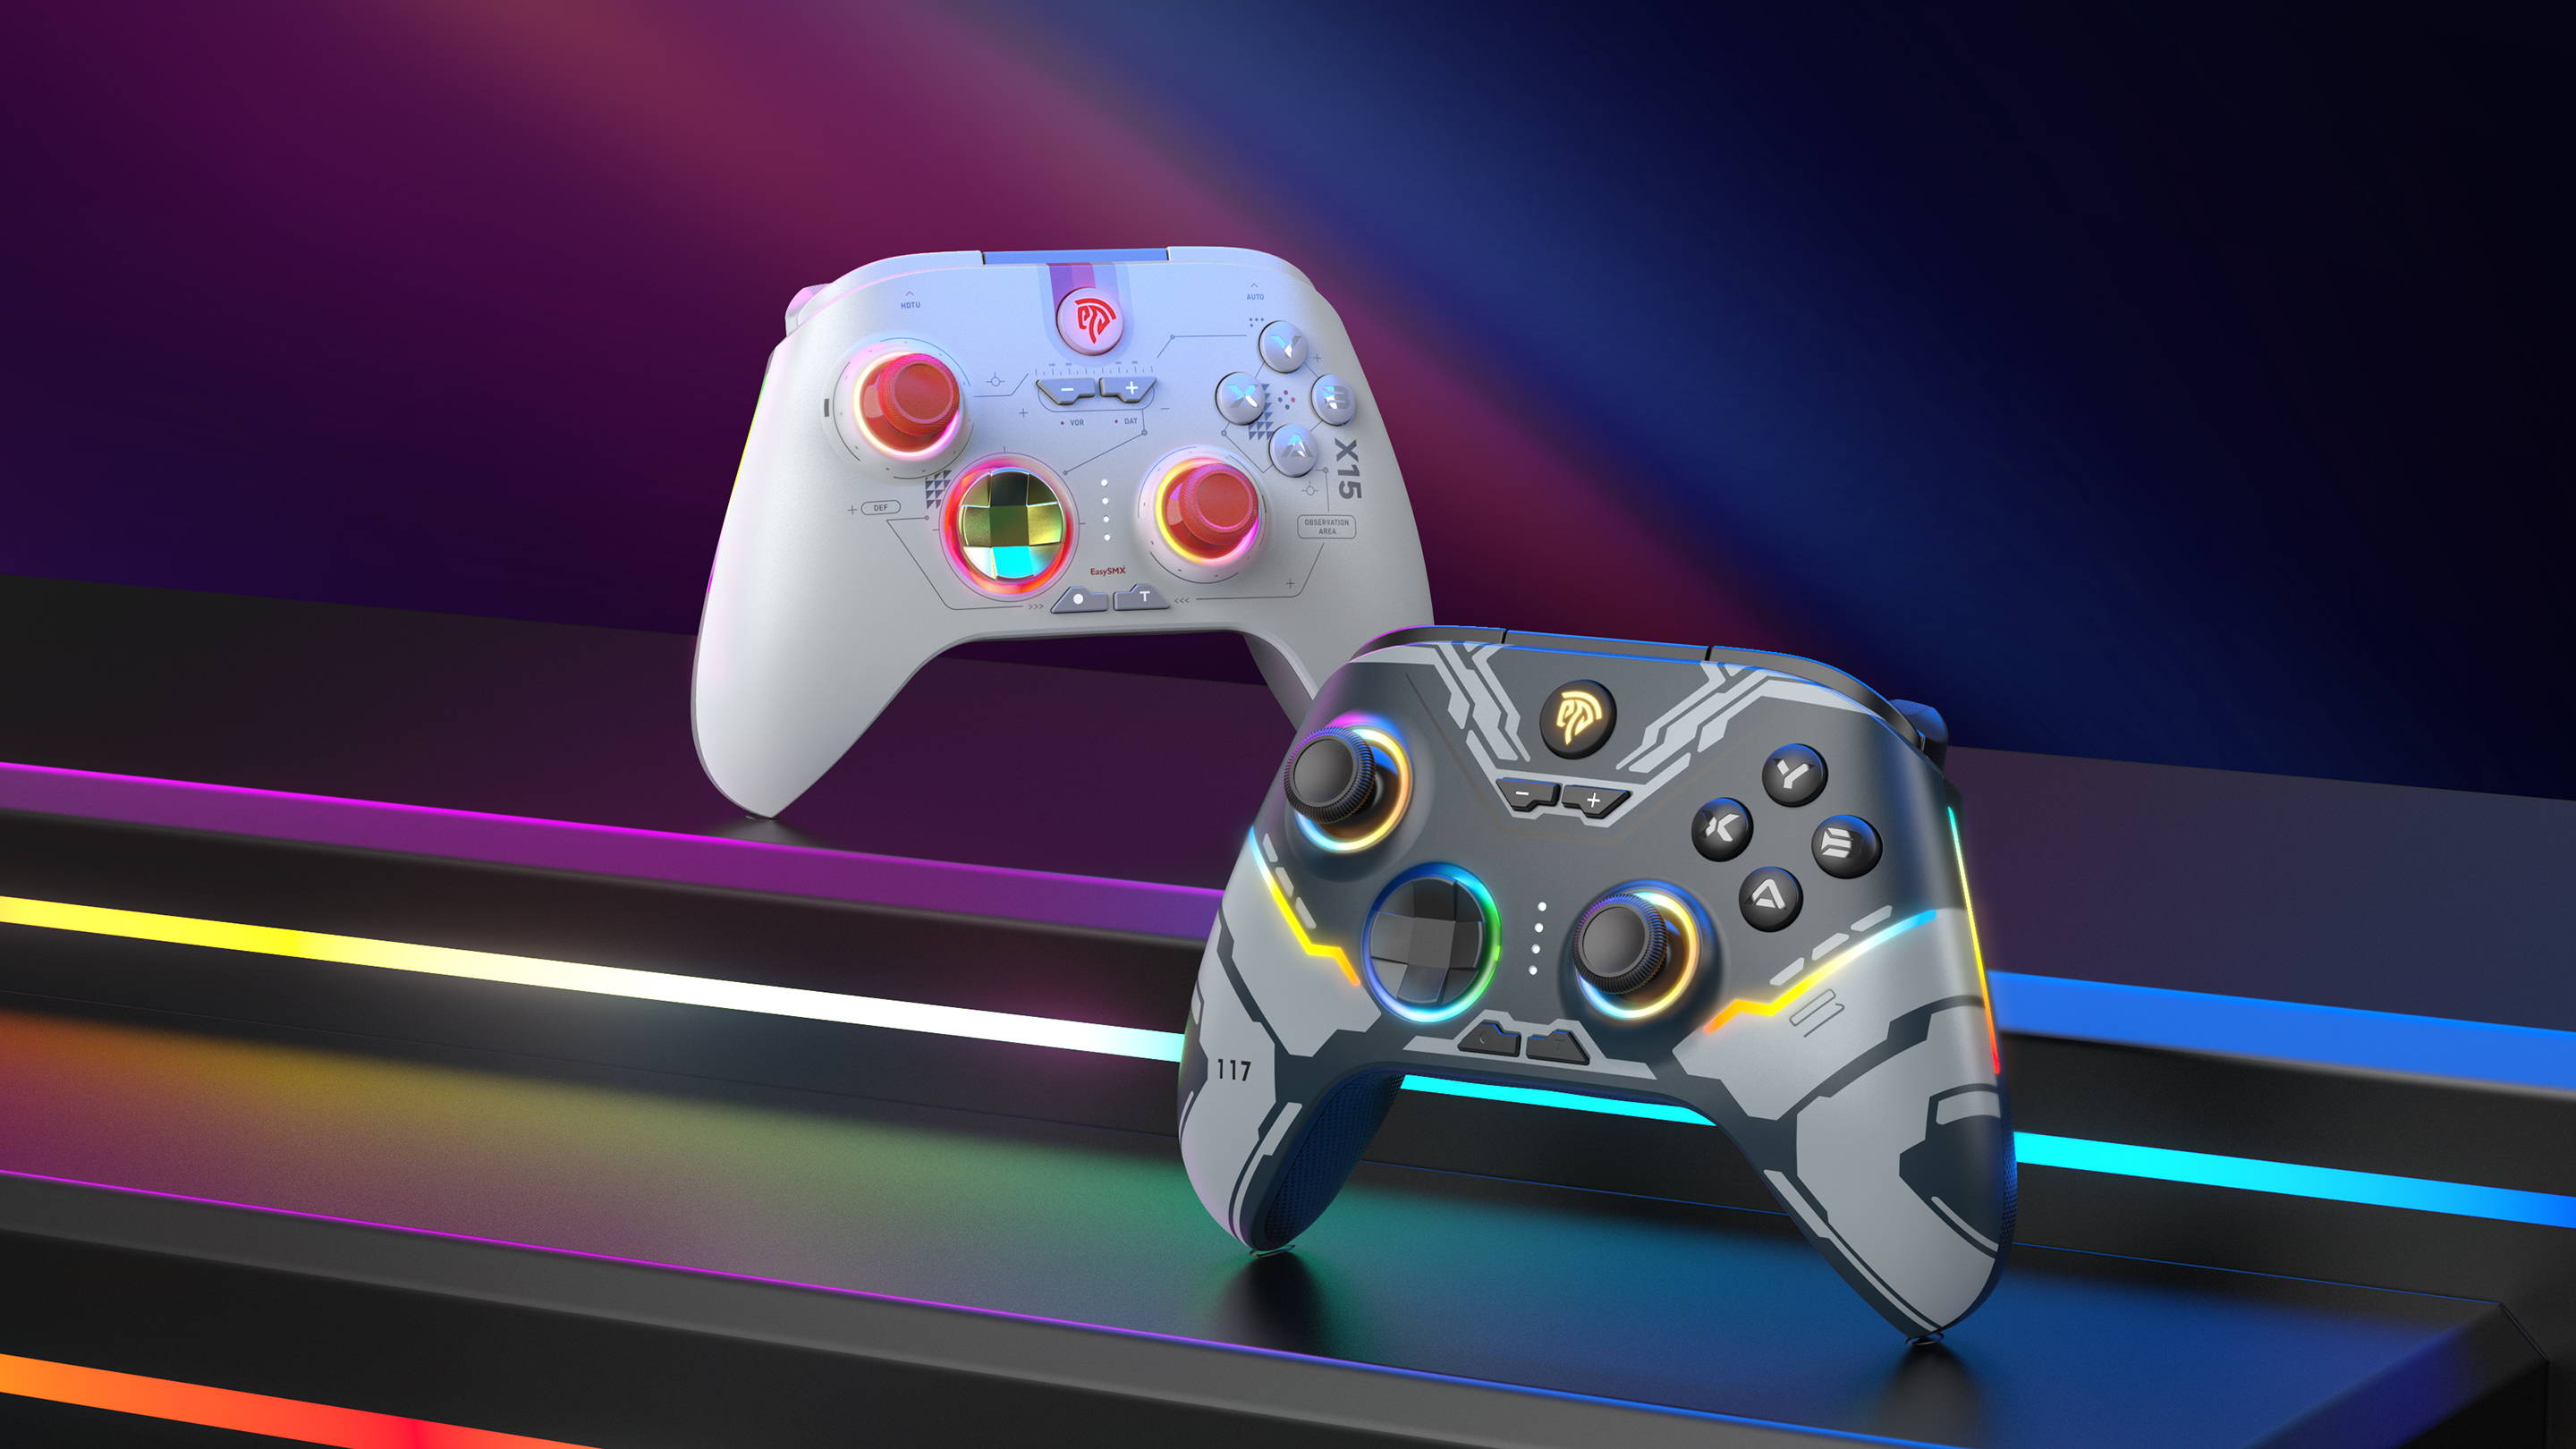 EasySMX X15 best rgb controller with hall joystick and hall trigger